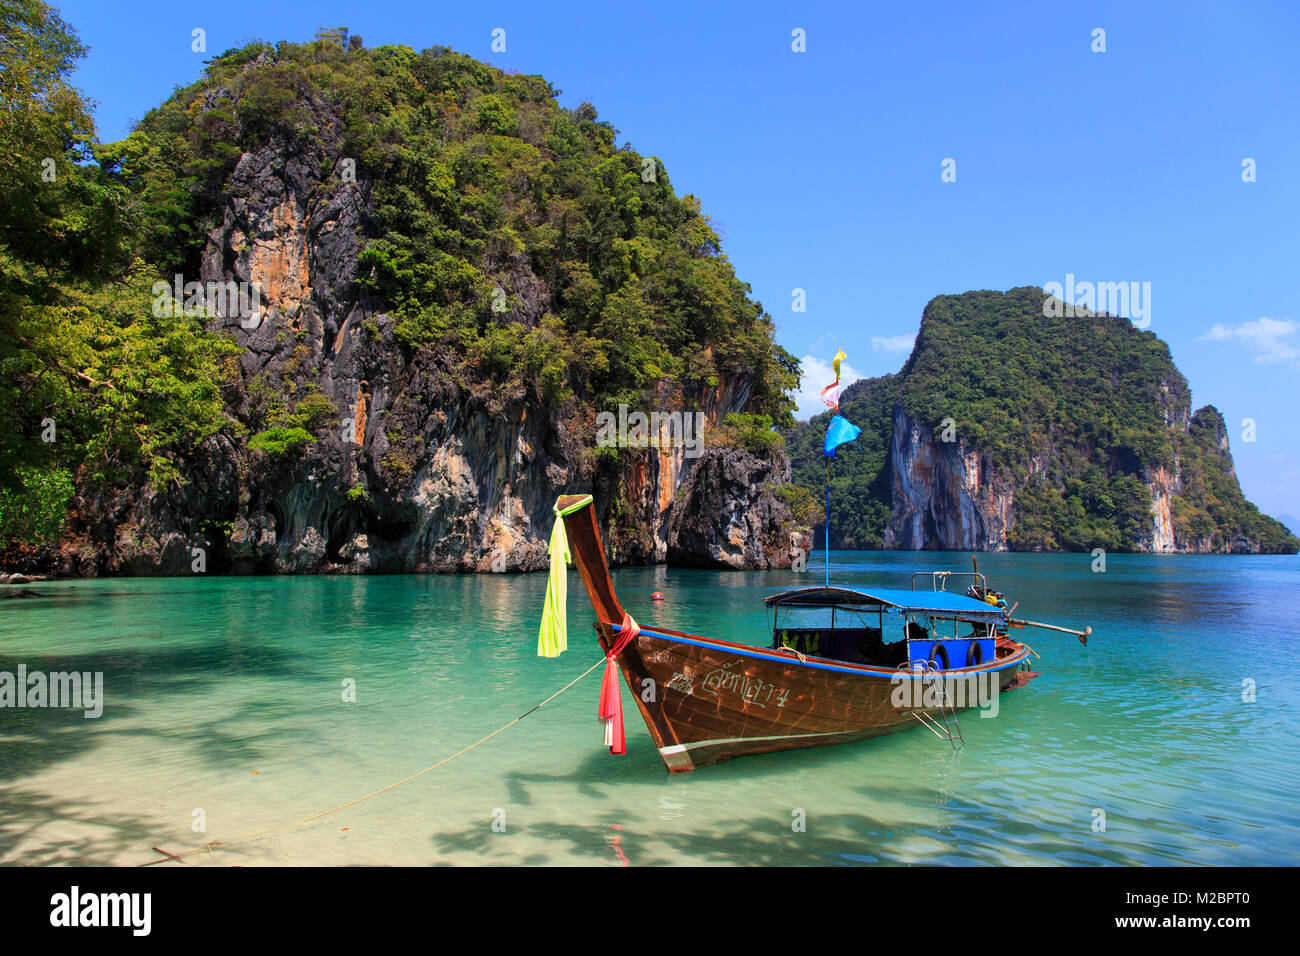 Images of Thailand and its people Stock Photo